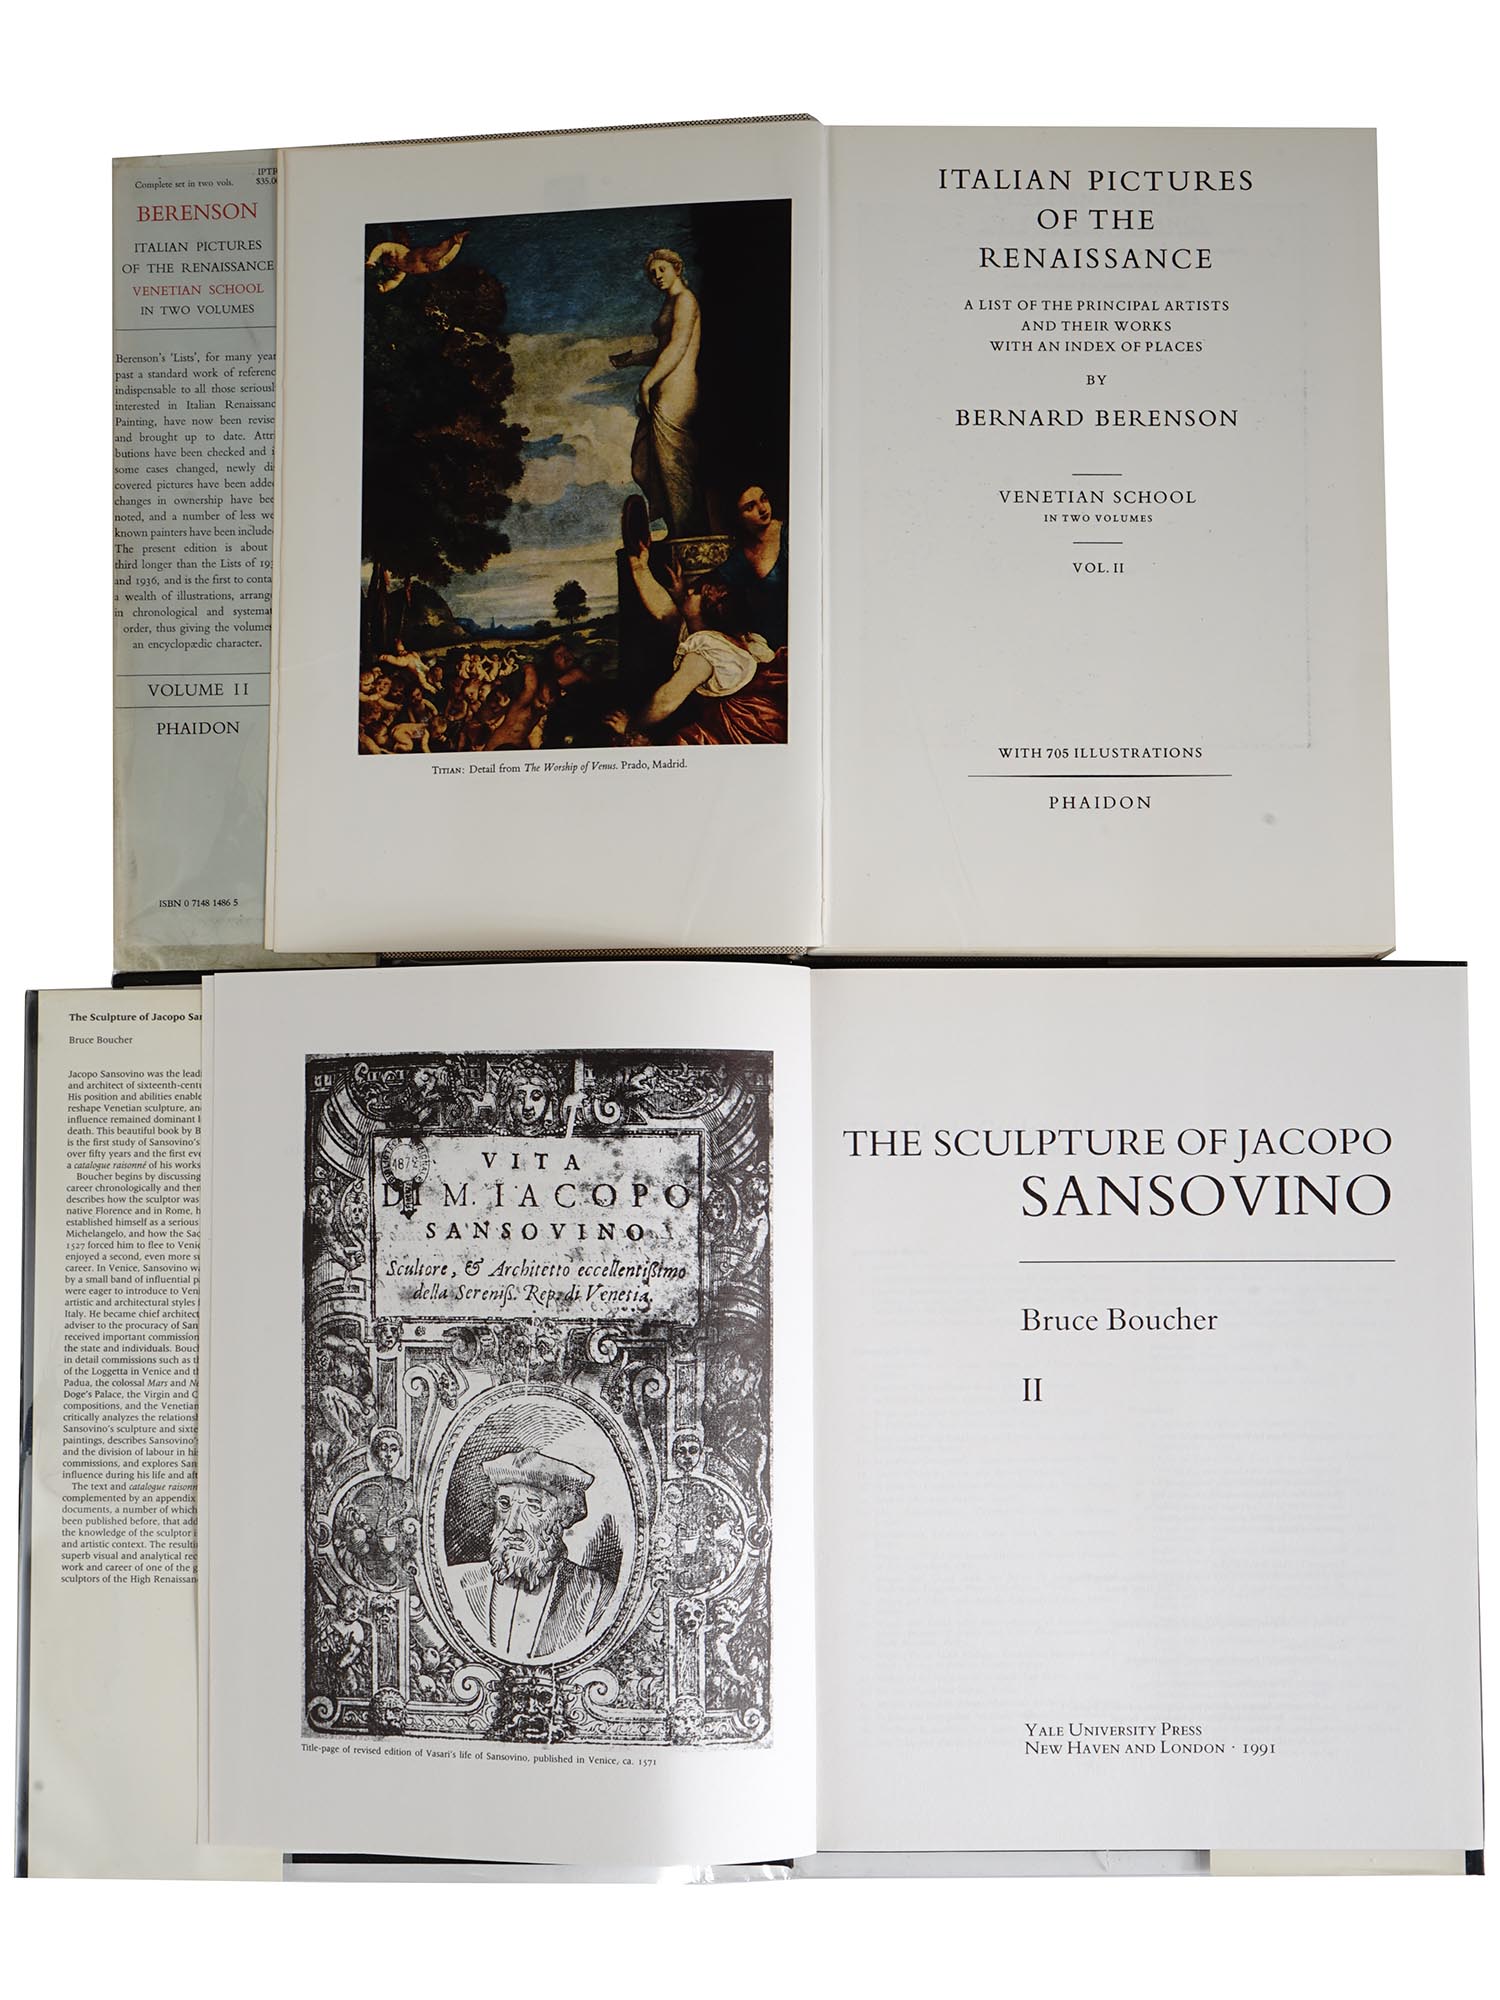 ITALIAN RENAISSANCE SCULPTURE AND PAINTING BOOKS PIC-5